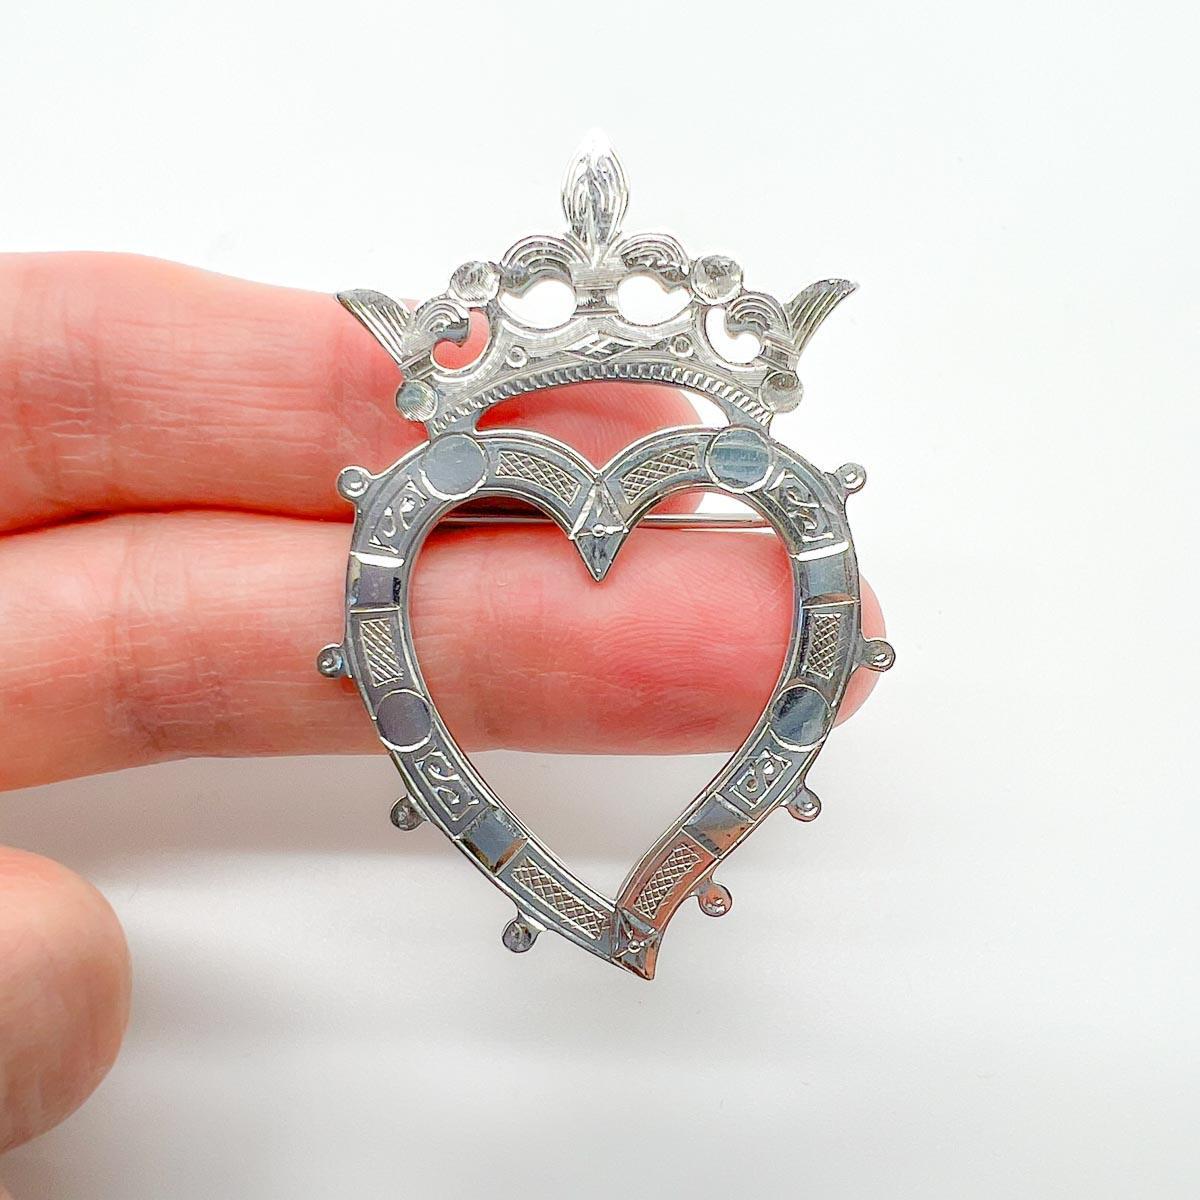 A Vintage Scottish Luckenbooth Brooch. Crafted in hallmarked Scottish Sterling Silver.
Luckenbooth brooches are traditional Scottish love tokens, usually heart shaped and often with a crown or coronet . These brooches were often given as a betrothal